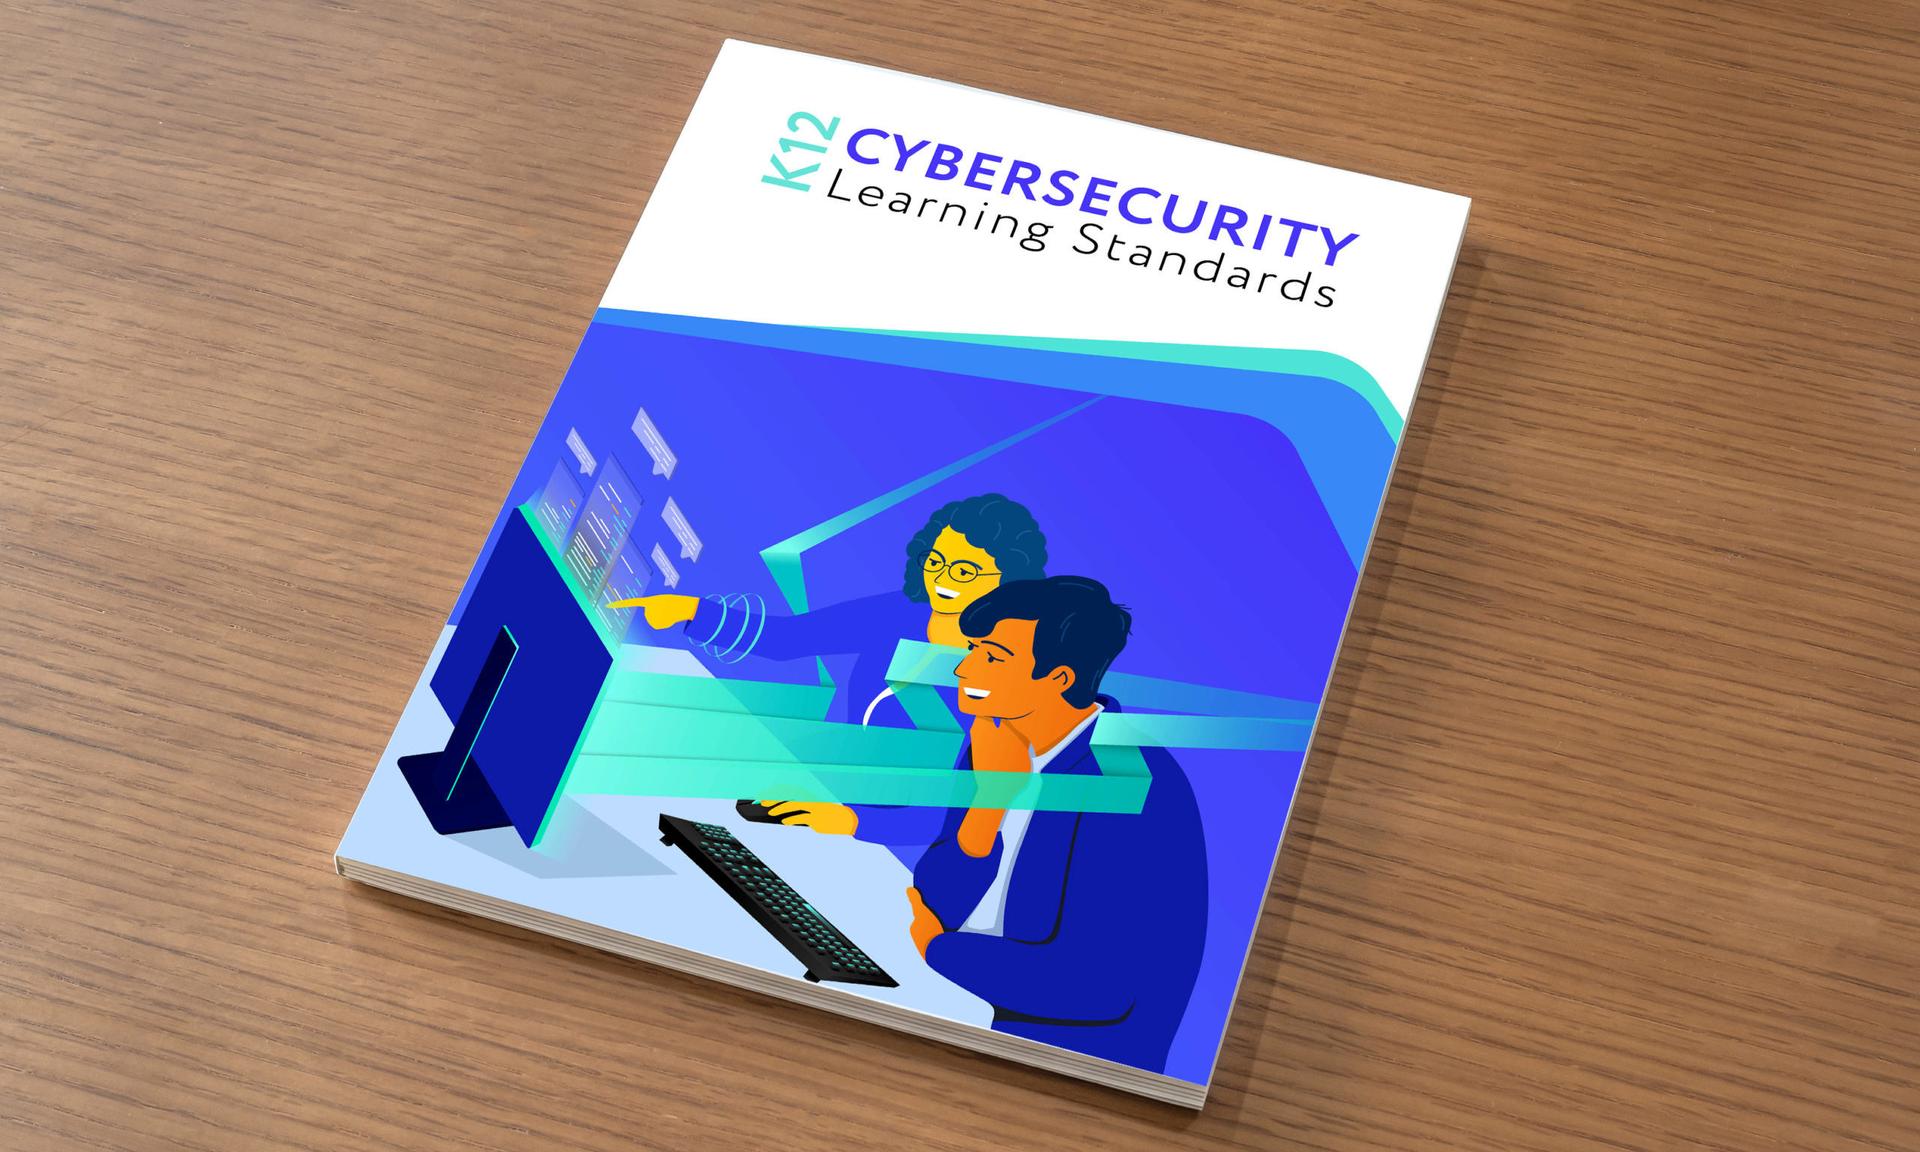 Cyber.org&#8217;s new K-12 cybersecurity learning standards booklet. (Cyber.org)